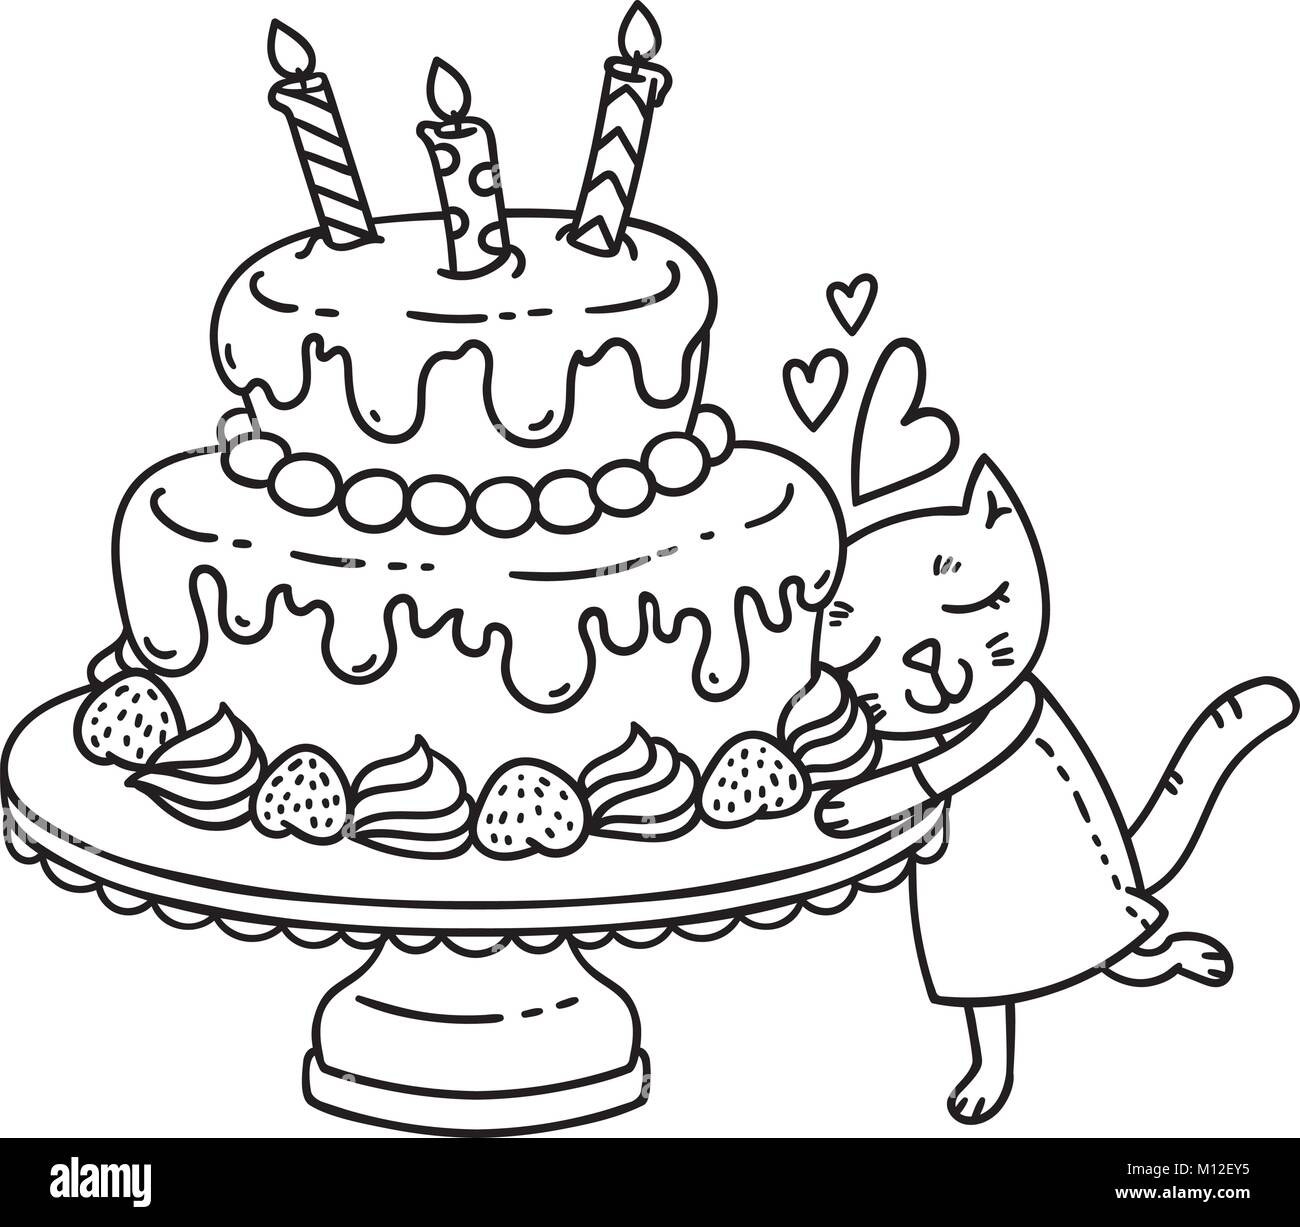 Birthday cake with candle and cute cat. Isolated objects on white background. Vector illustration. Coloring page. Stock Vector